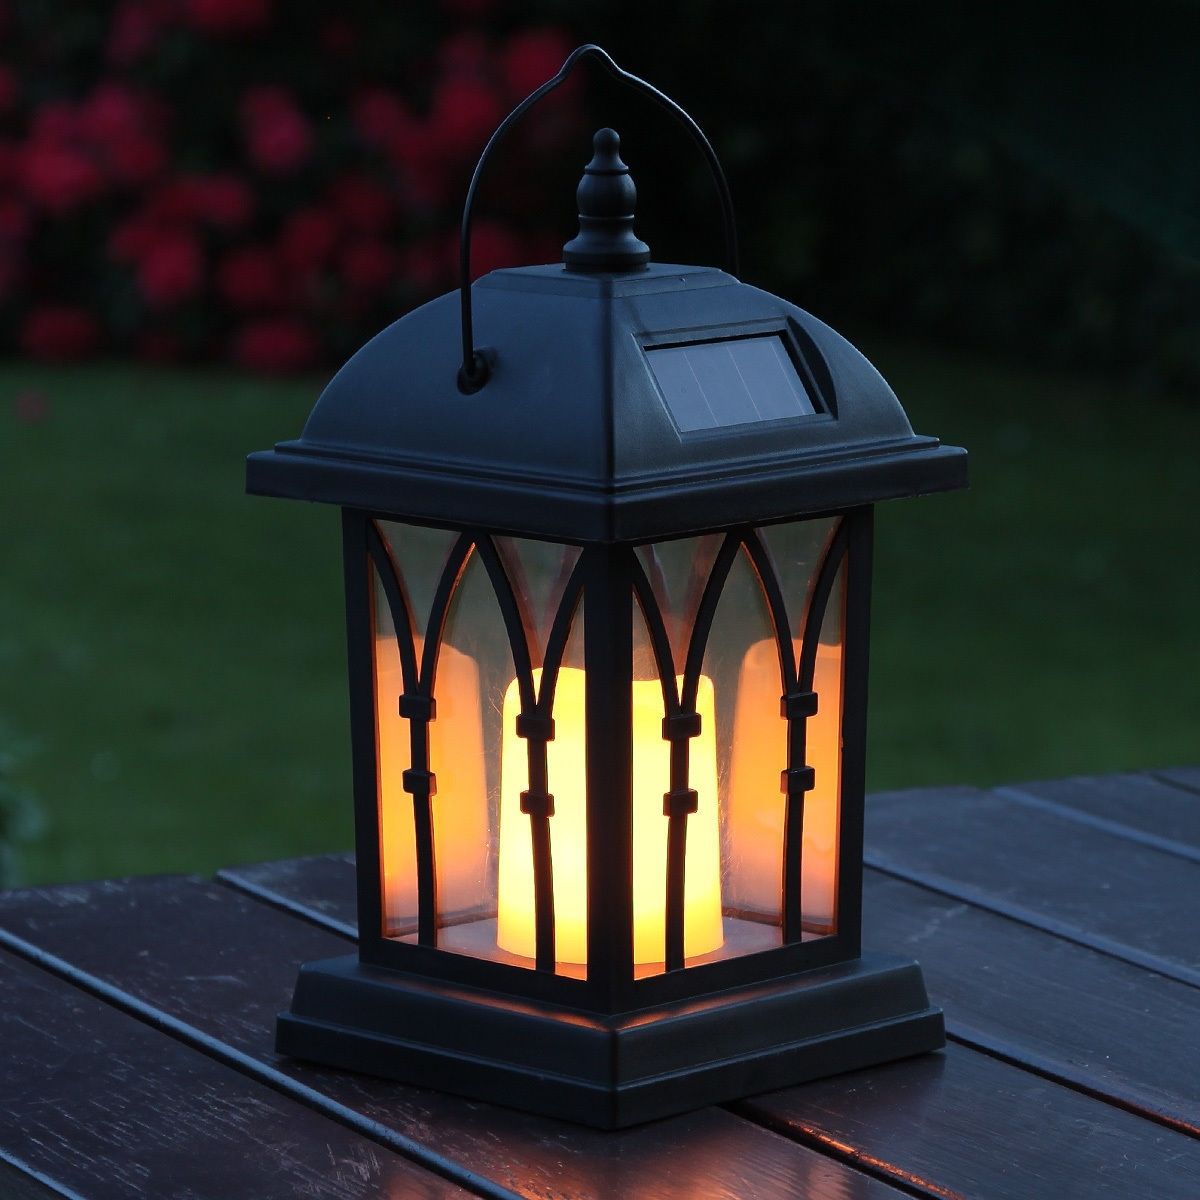 Outdoor Décor Candle Lanterns , Garden Lighting , Garden & Patio Throughout Current Outdoor Lanterns With Flameless Candles (View 6 of 20)